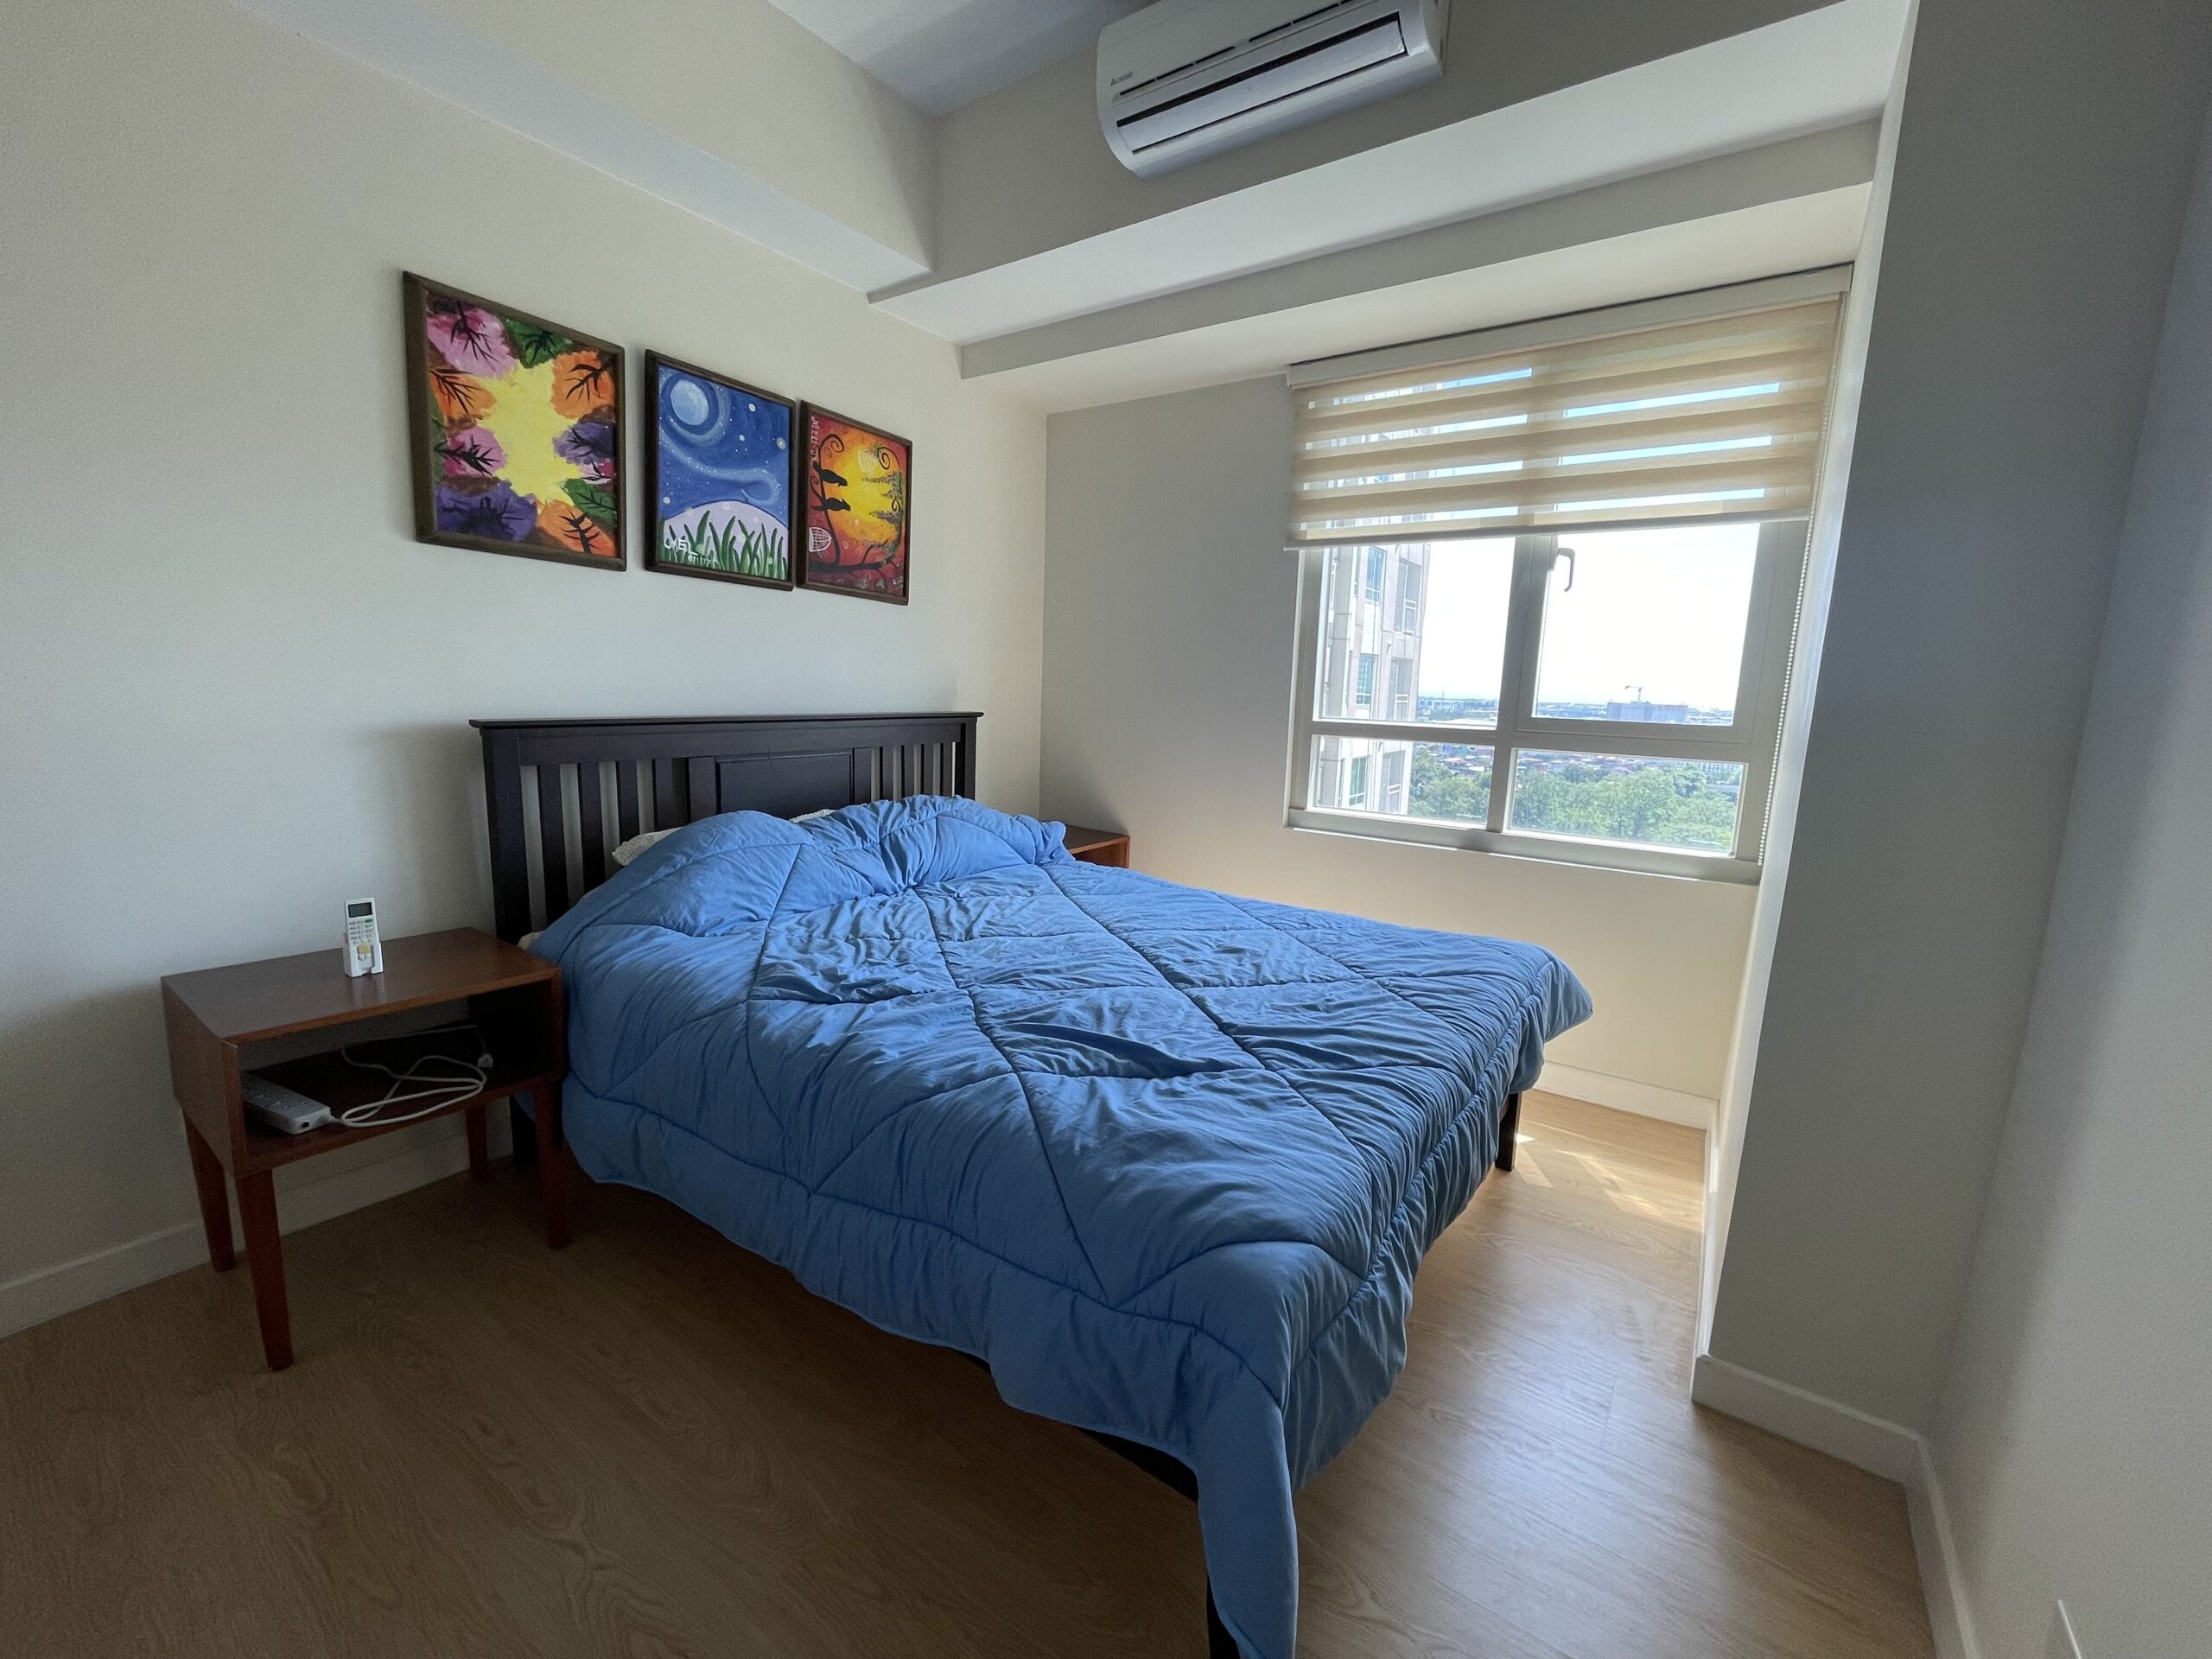 1 Bedroom Condo Unit in The Grove by Rockwell, Pasig City